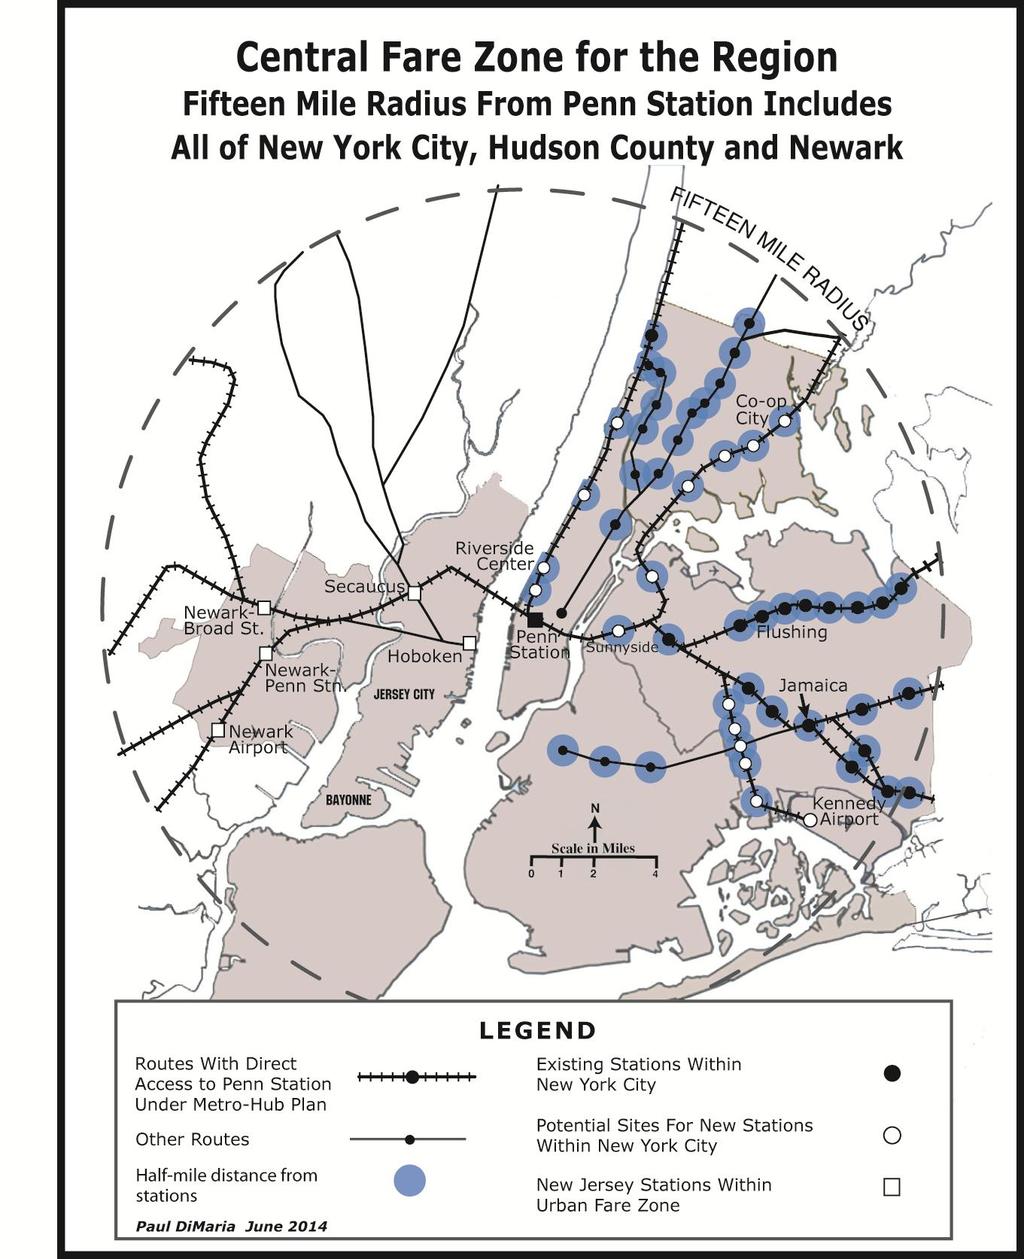 Create central fare zone in NYC, extend to NJ urban core All regional rail stations in NYC would be included in Central Fare